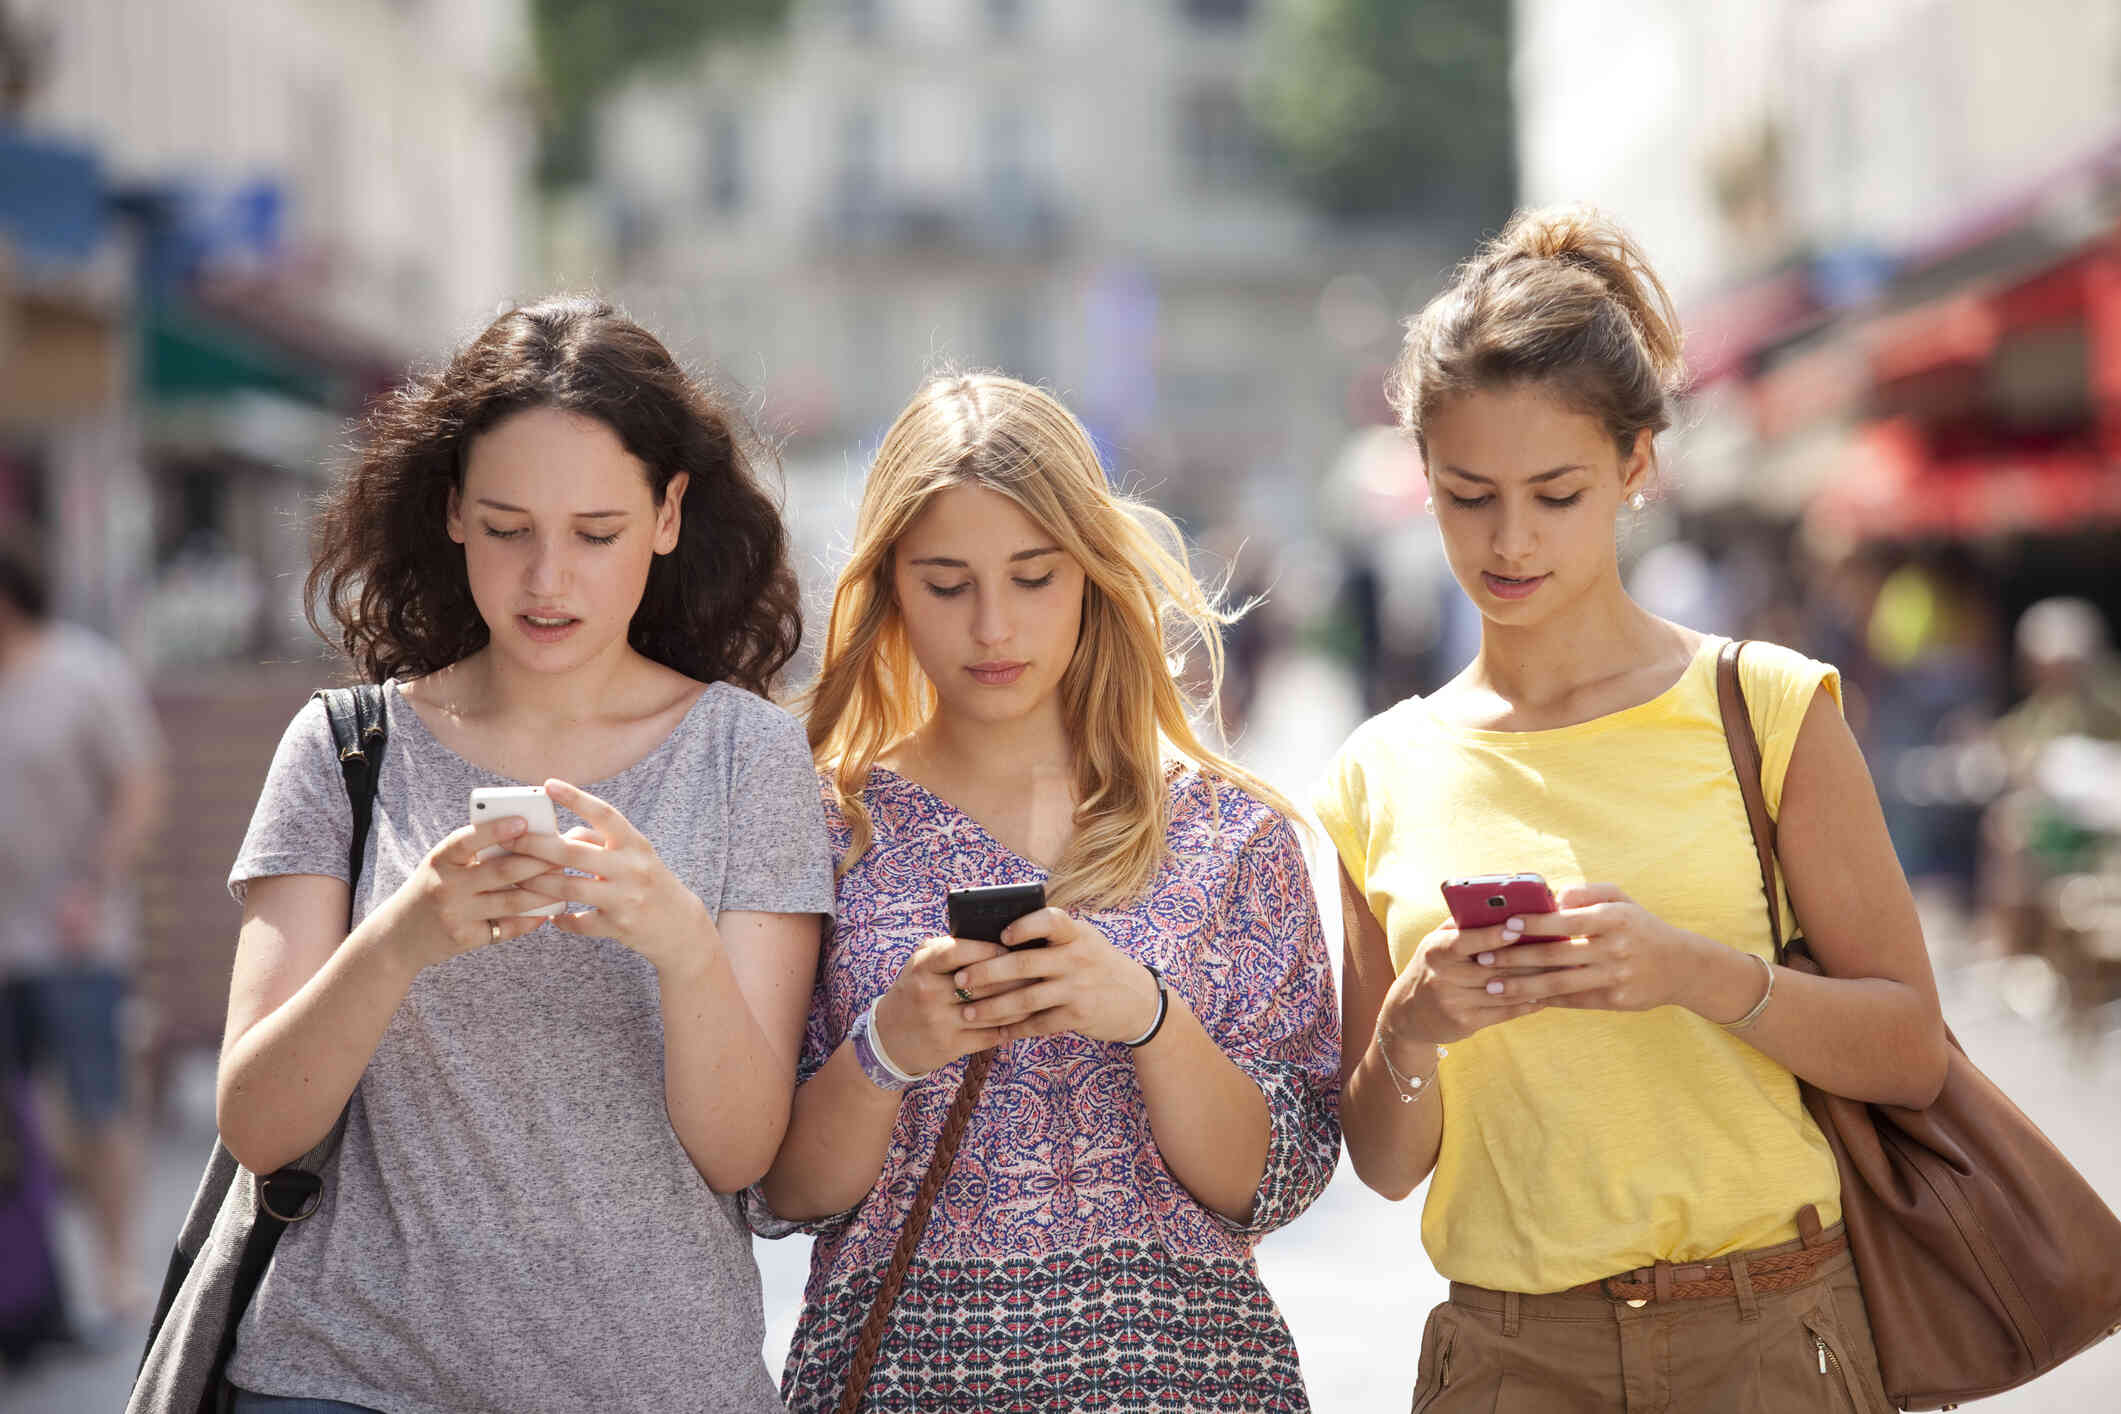 Three teenage girls walk down the street on a sunny day while looking down at the cellphones in their hands.